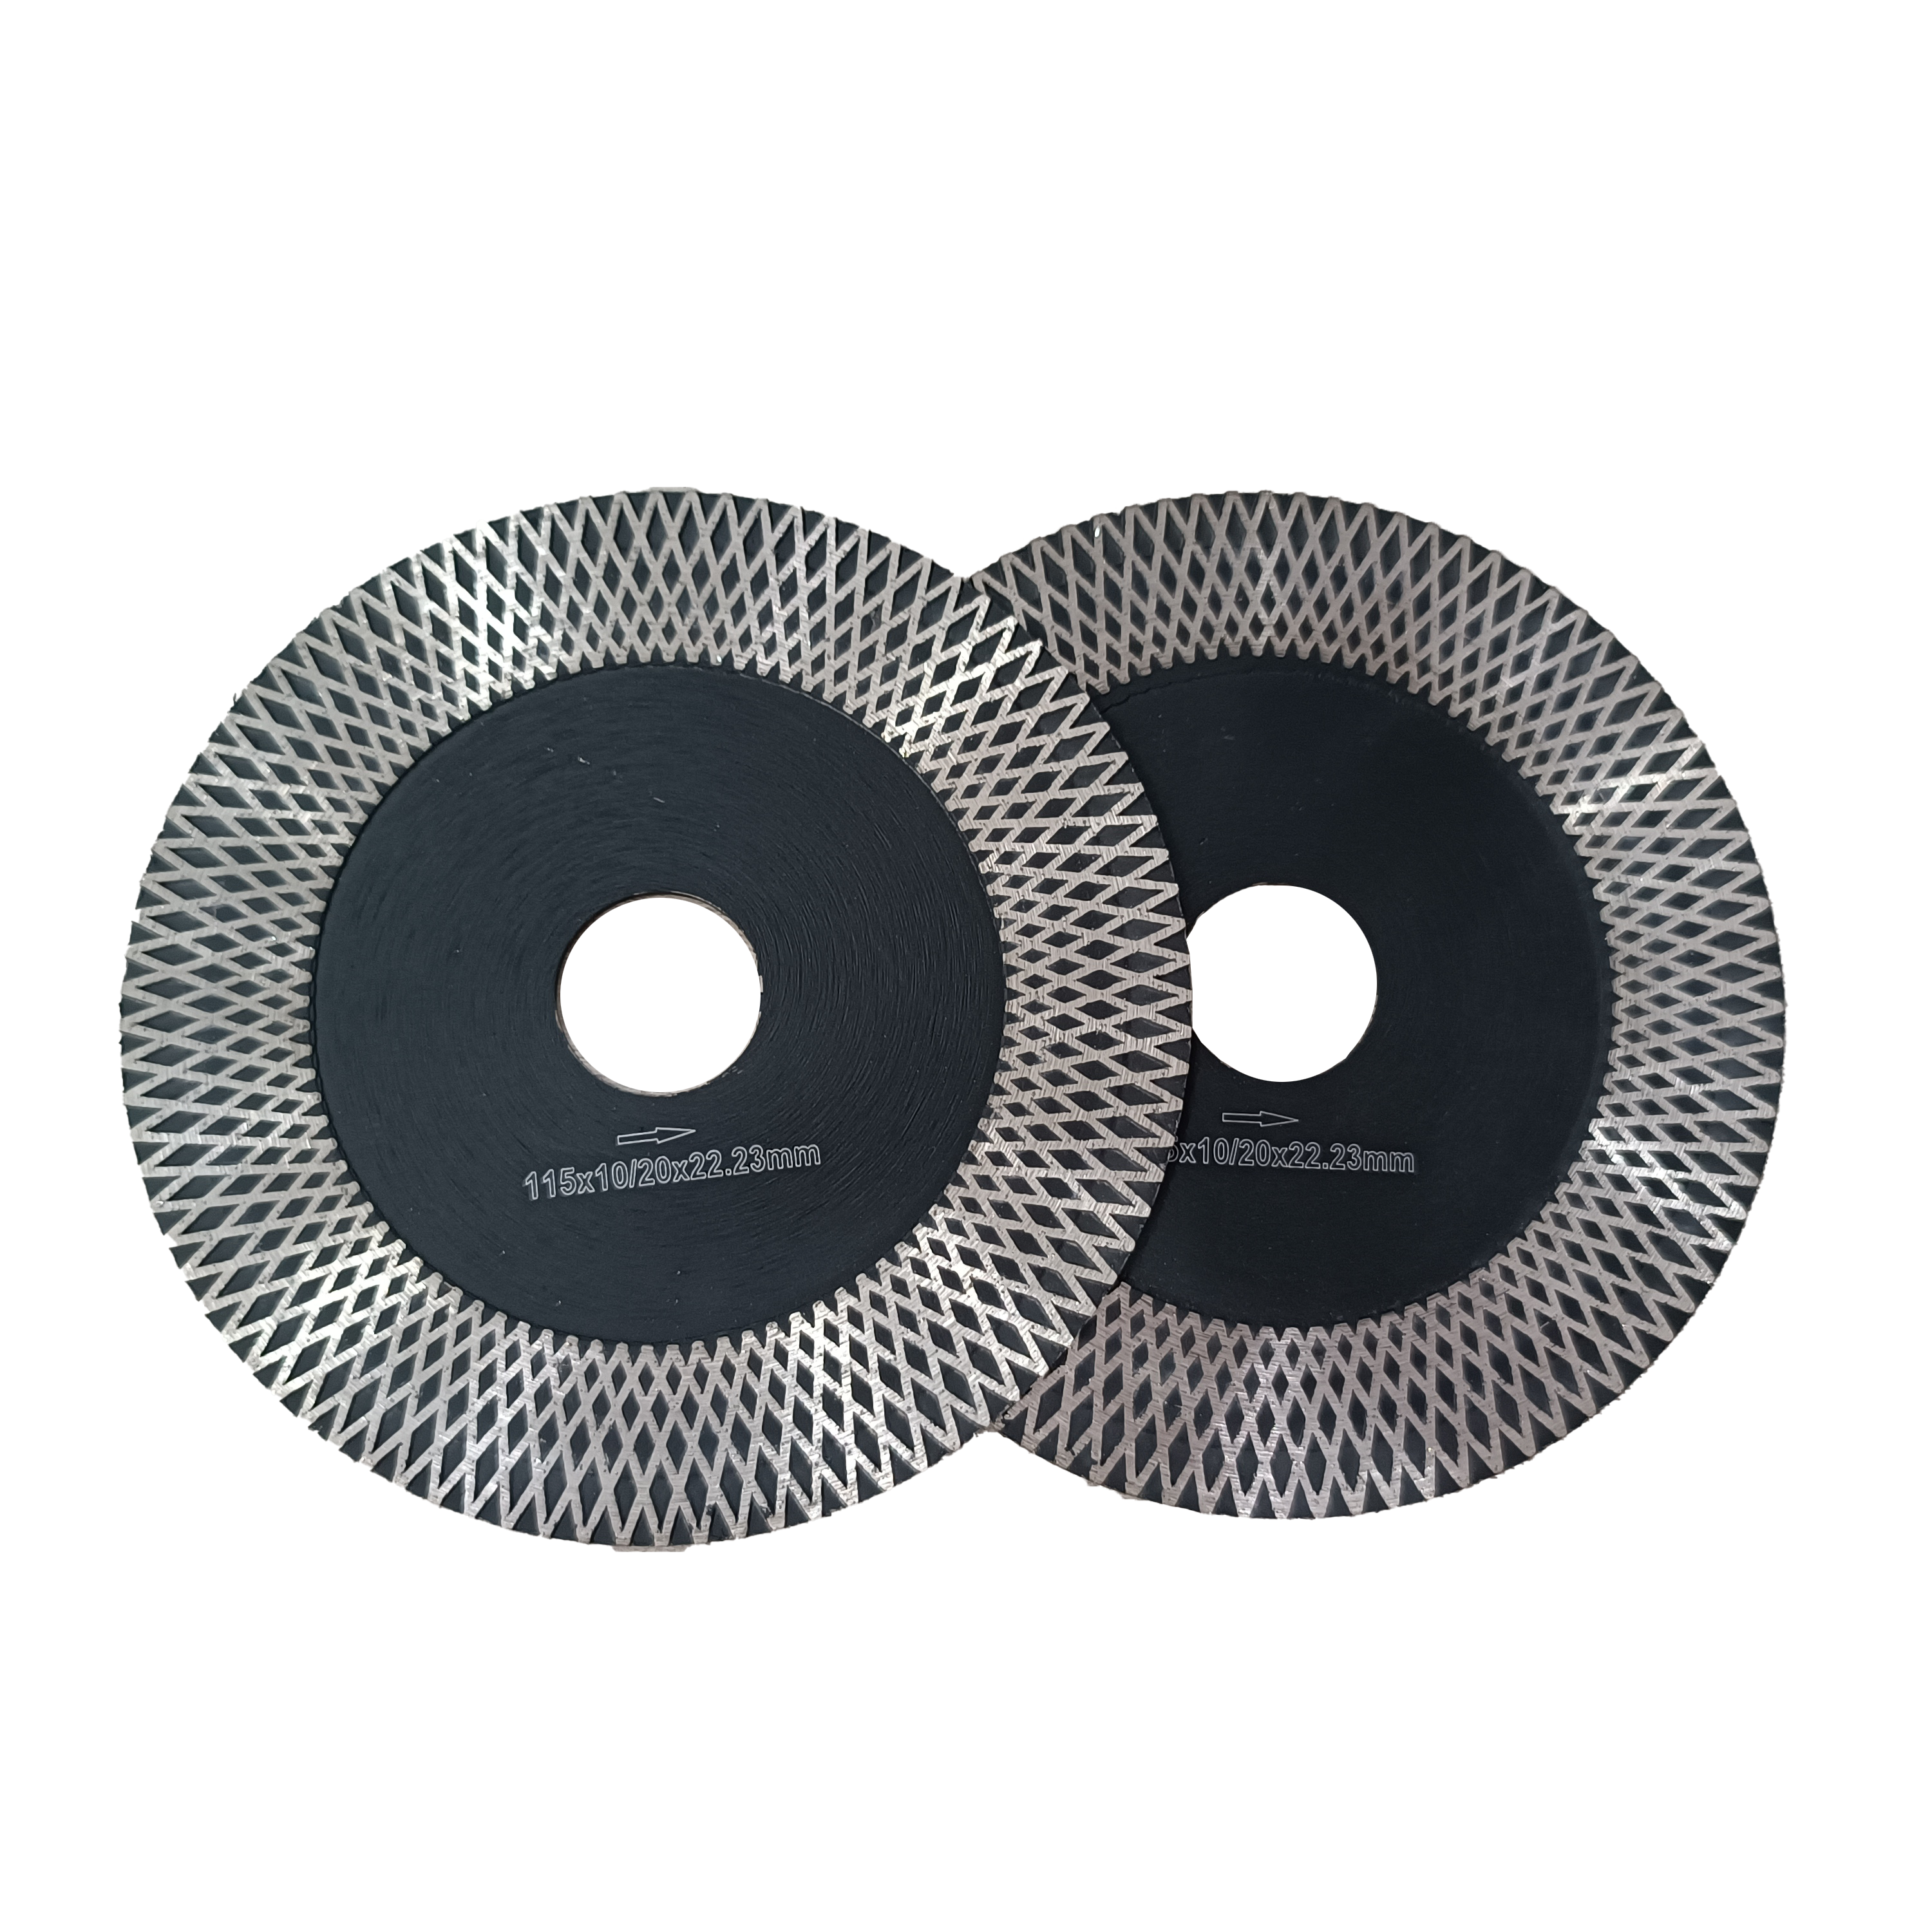 Stone saw blade in the process of cutting common problems